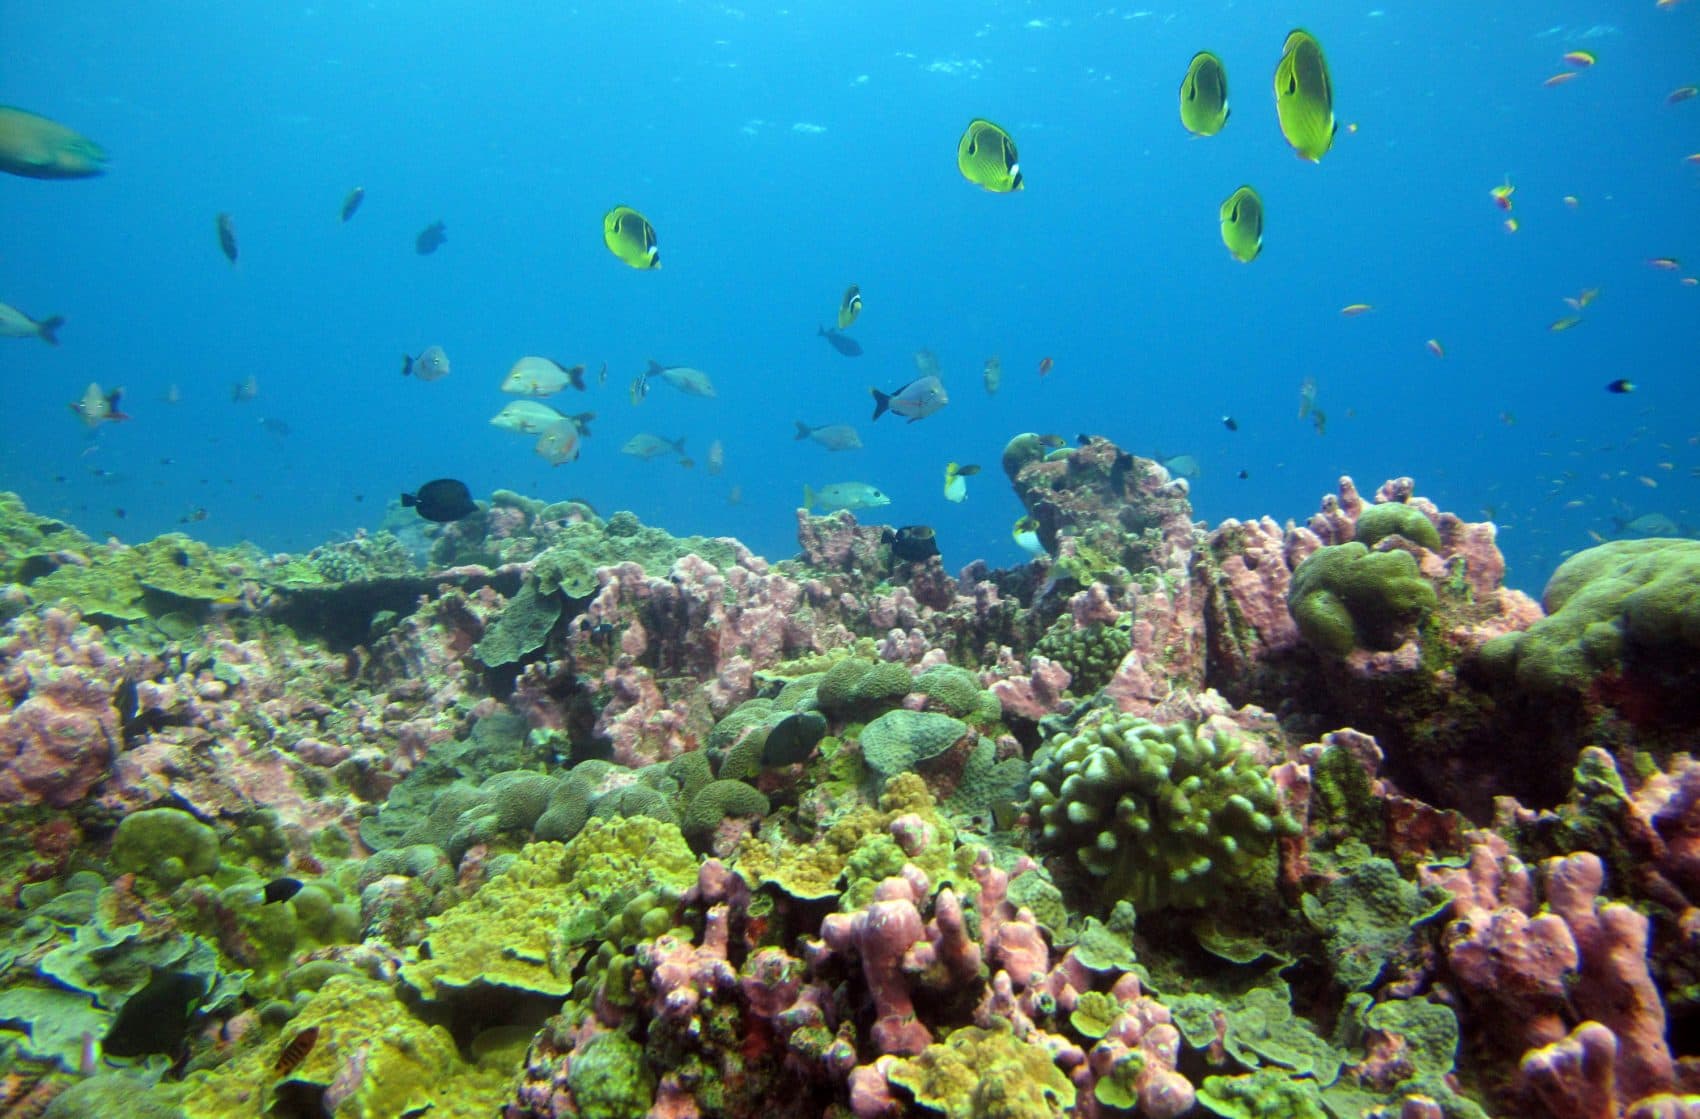 Fish swim above a coral reef off Kanton Island in the Pacific Ocean. (Courtesy of Randi Rotjan)